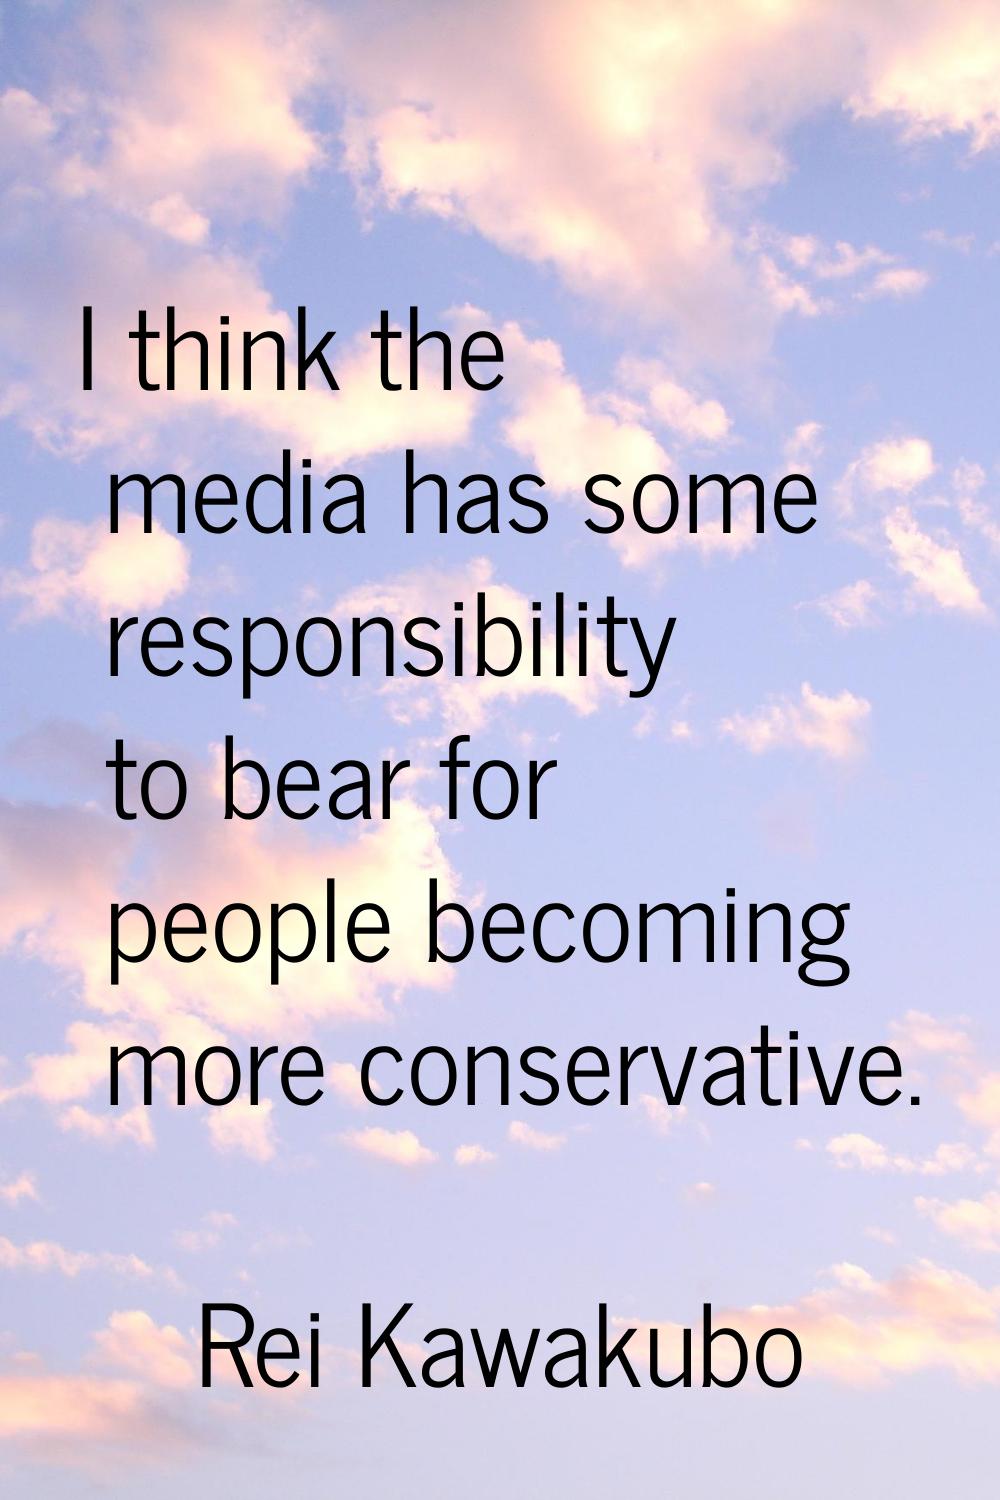 I think the media has some responsibility to bear for people becoming more conservative.